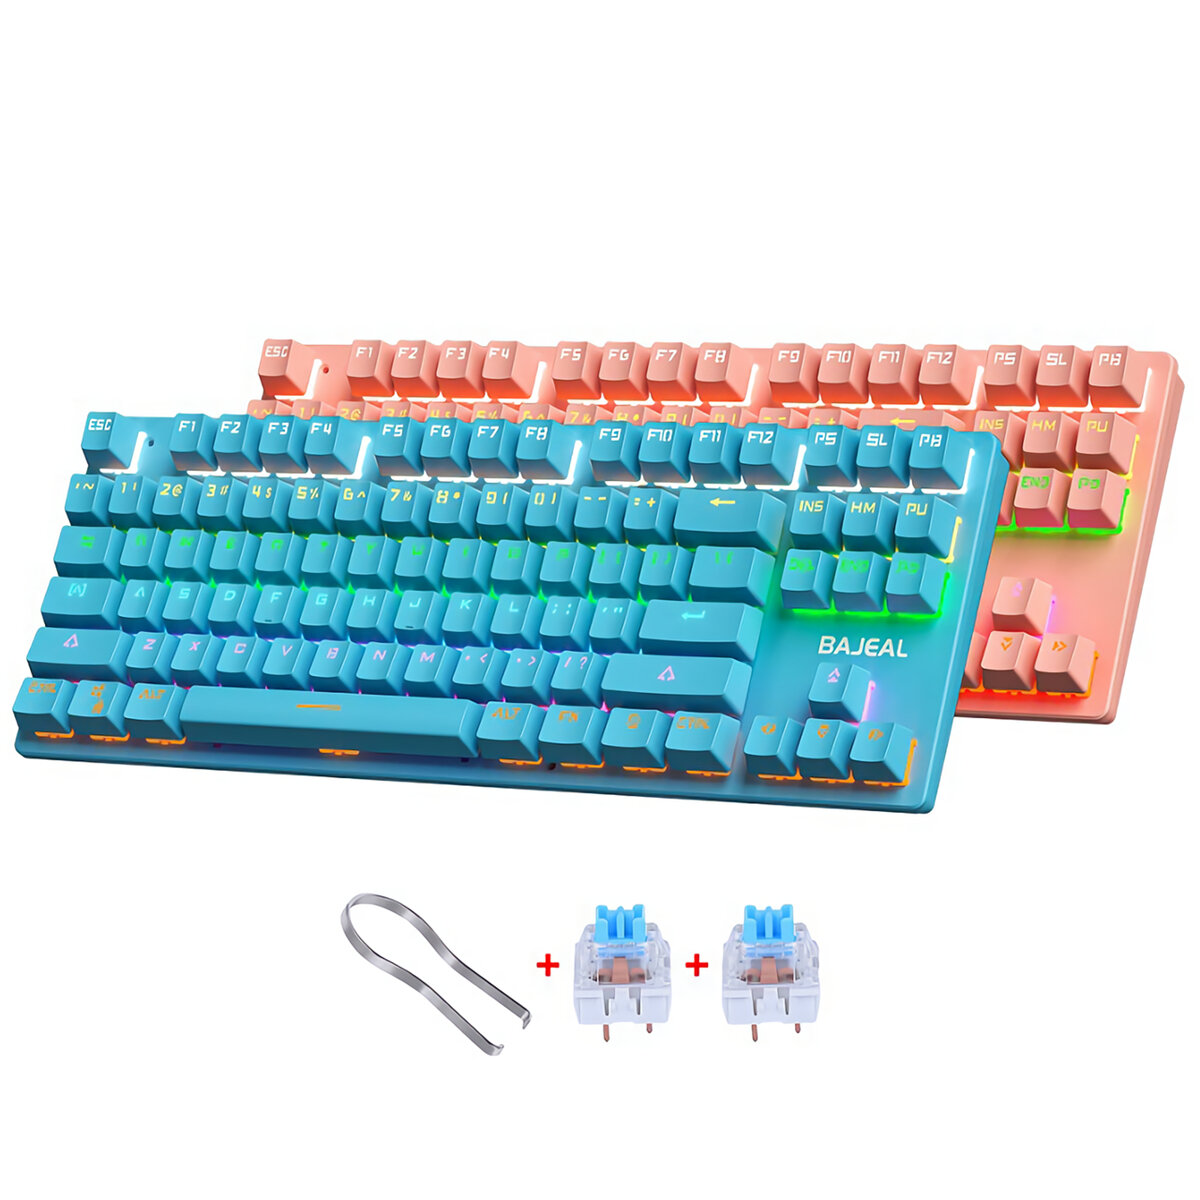 

BAJEAL K300 87 Keys Mechanical Keyboard USB Wired Hot Swappable Blue Swtich Colorful LED Backlight Gaming Keyboard for G